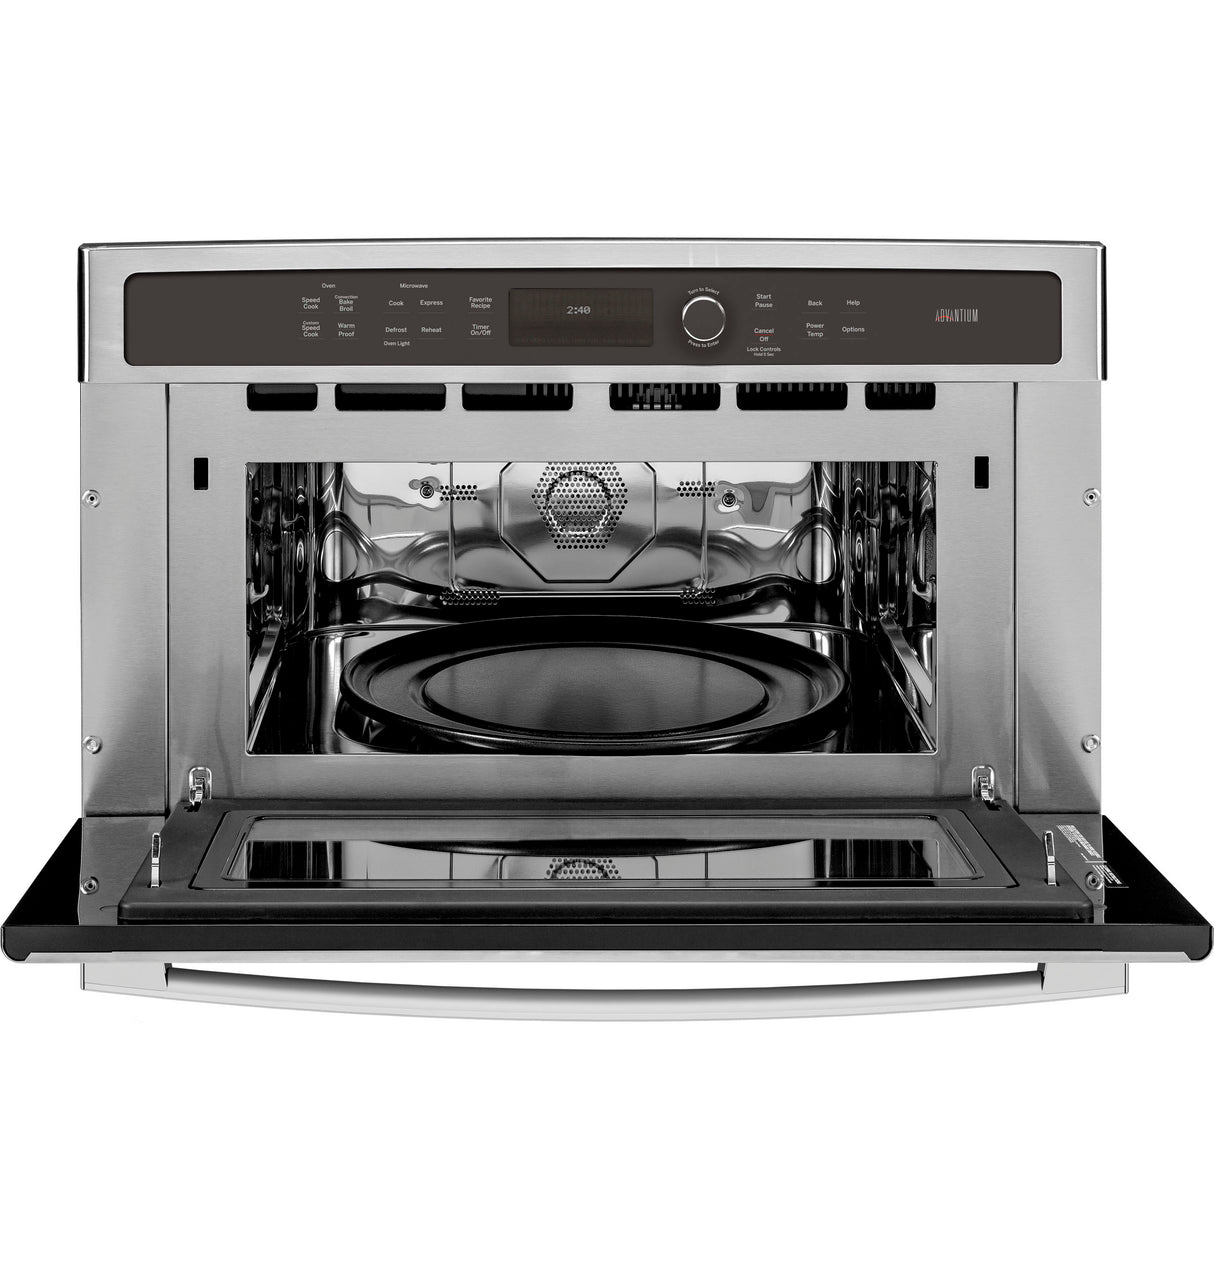 GE Profile(TM) 30 in. Single Wall Oven with Advantium(R) Technology - (PSB9240SFSS)